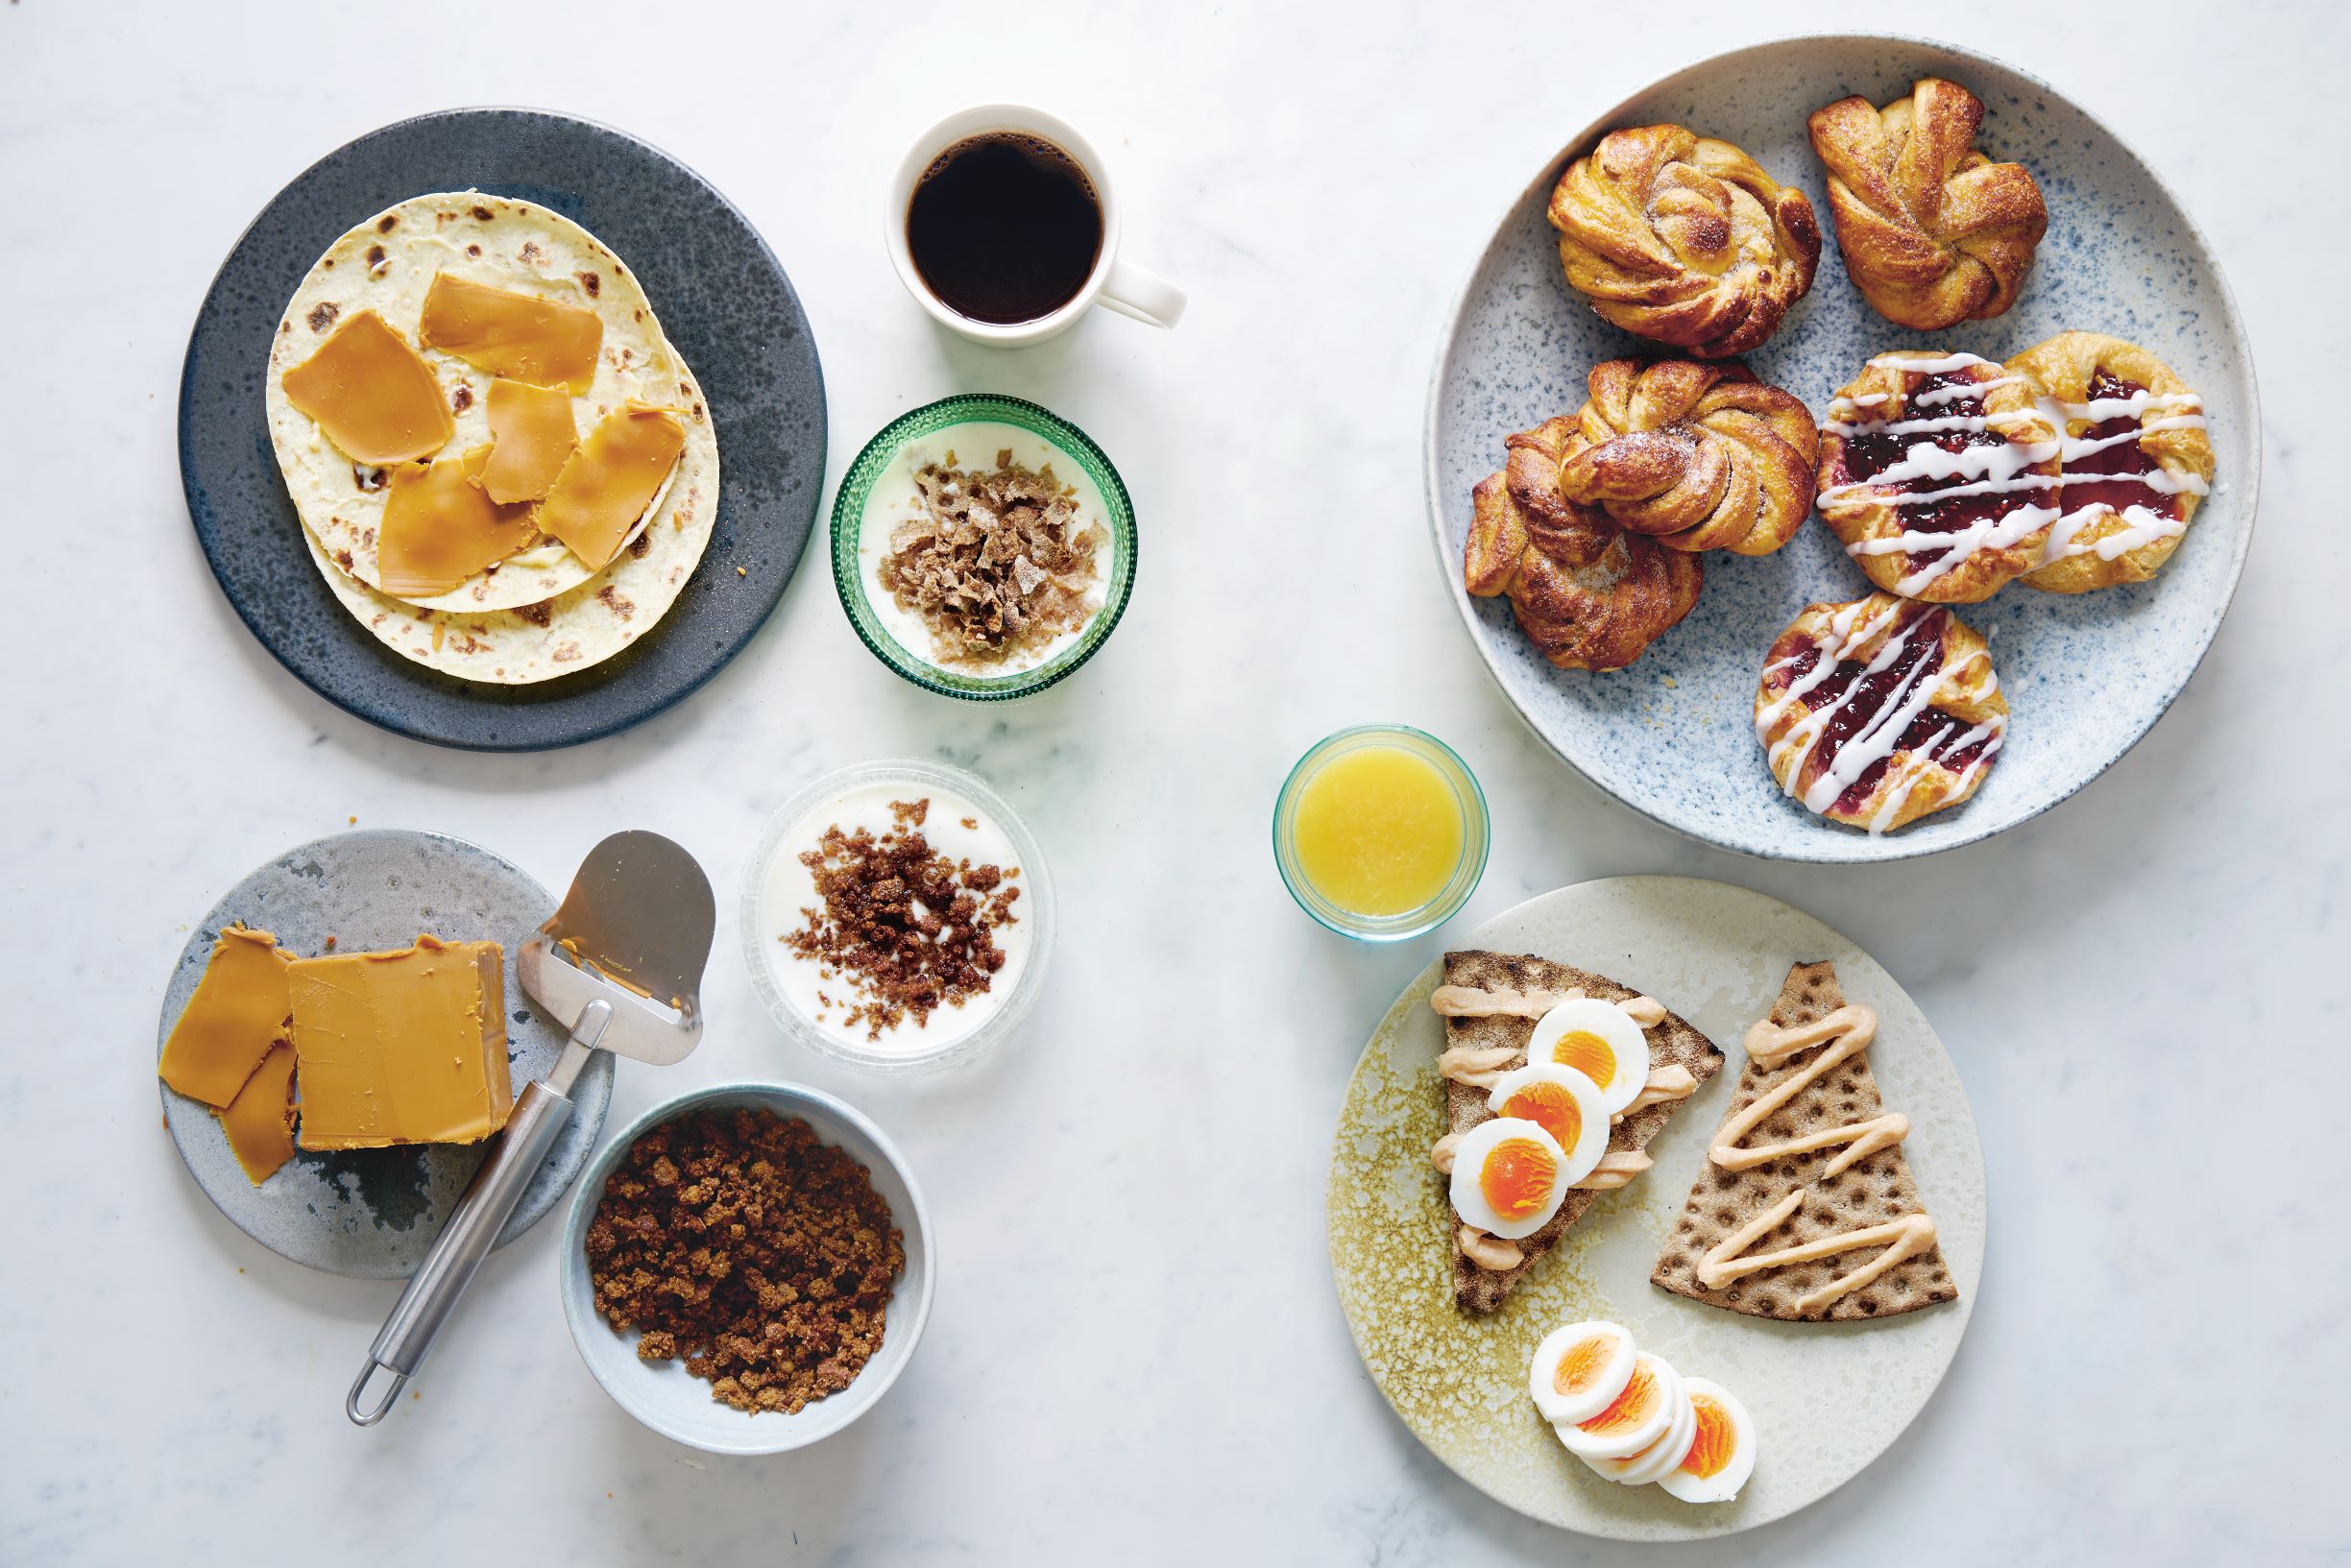 Clockwise from top left: Brown cheese sandwich; filmjölk; Danish pastry; cardamom buns; crispbread with smoked cod roe spread; ymerdrys; ymer with ymerdrys; all from the Nordic pages of Breakfast: The Cookbook